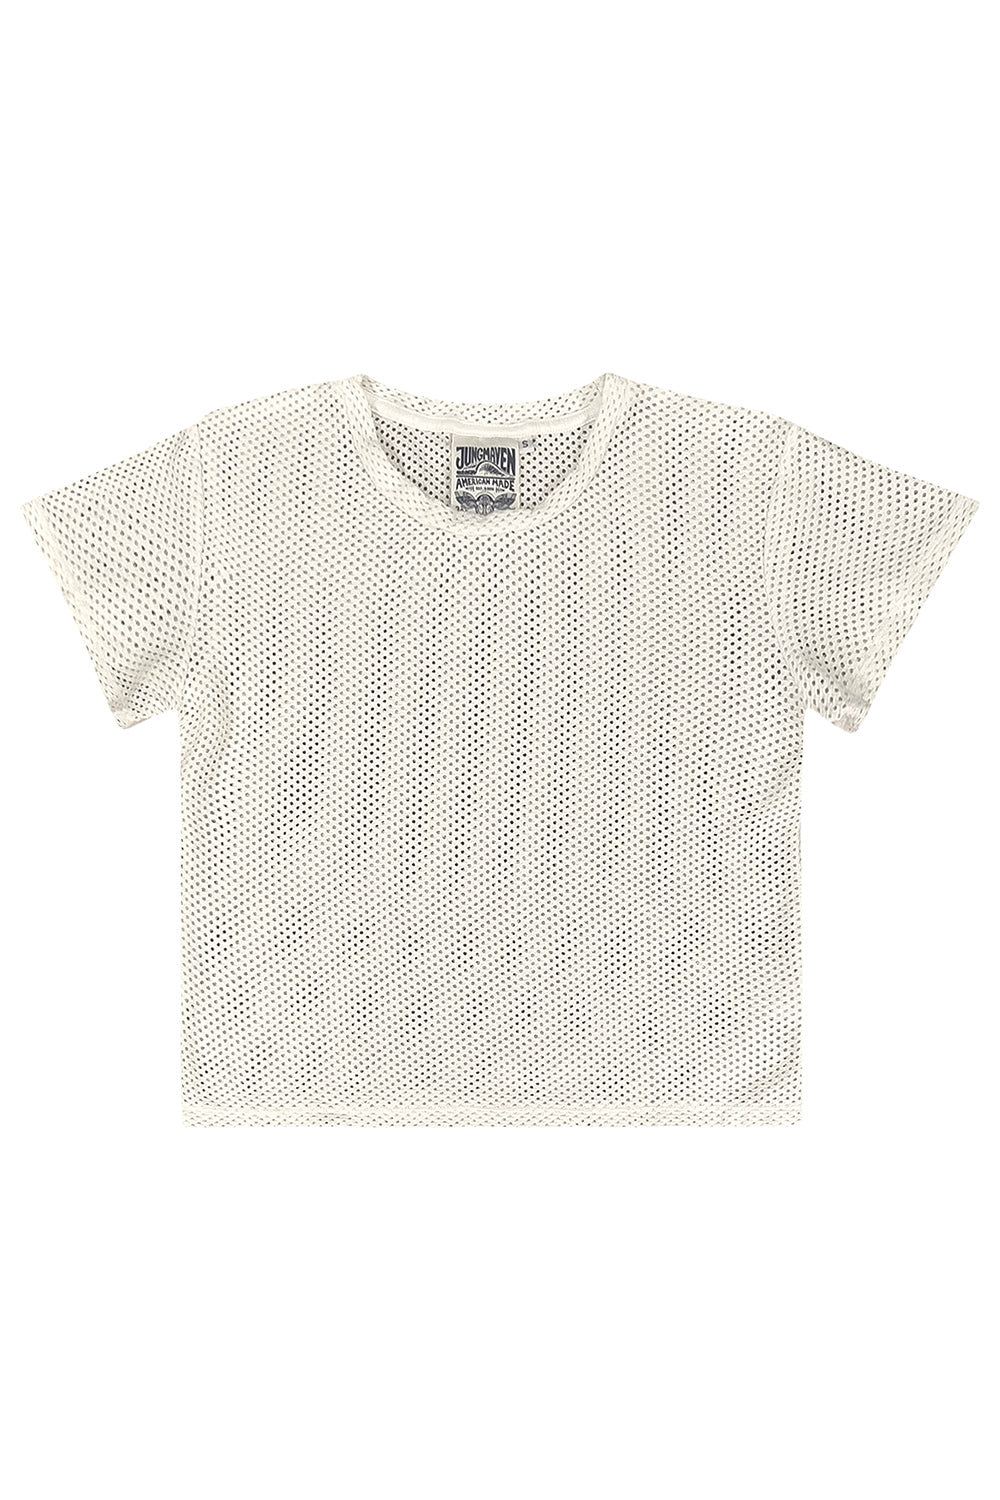 Carmen Mesh Cropped Tee | Jungmaven Hemp Clothing & Accessories / Color: Washed White